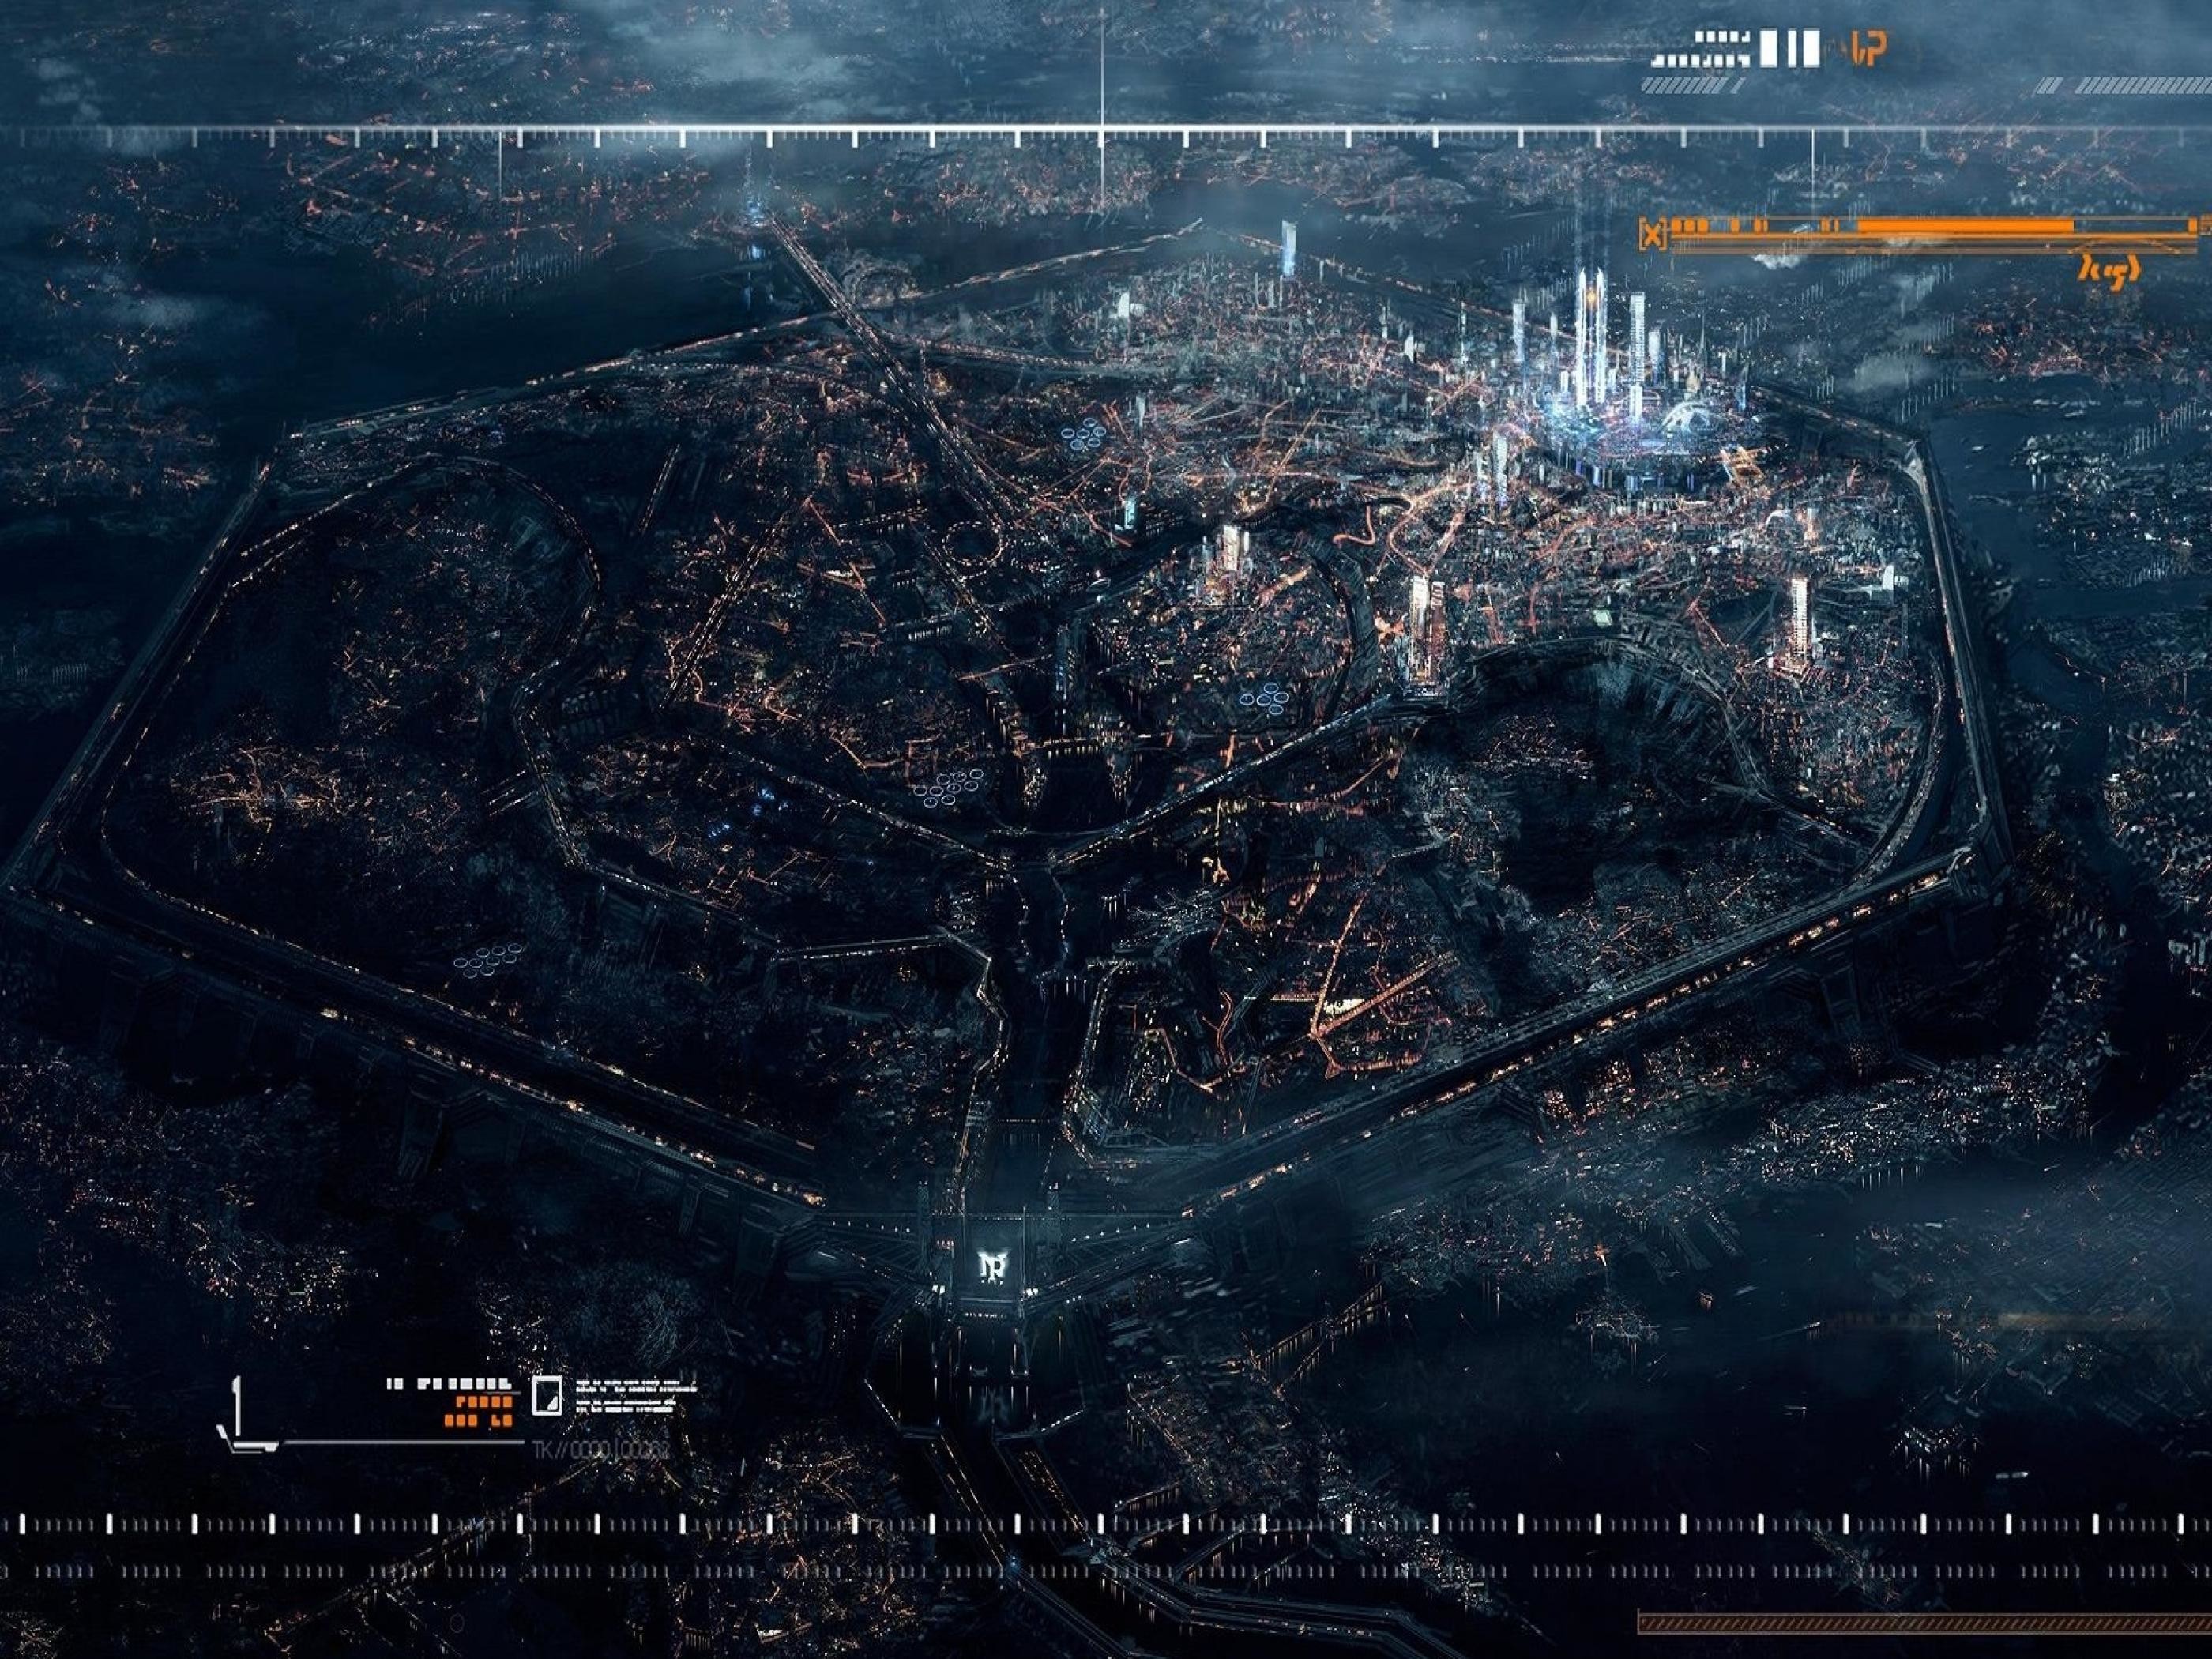 2800x2100, Prepared Resolutions - Science Fiction City Map - HD Wallpaper 